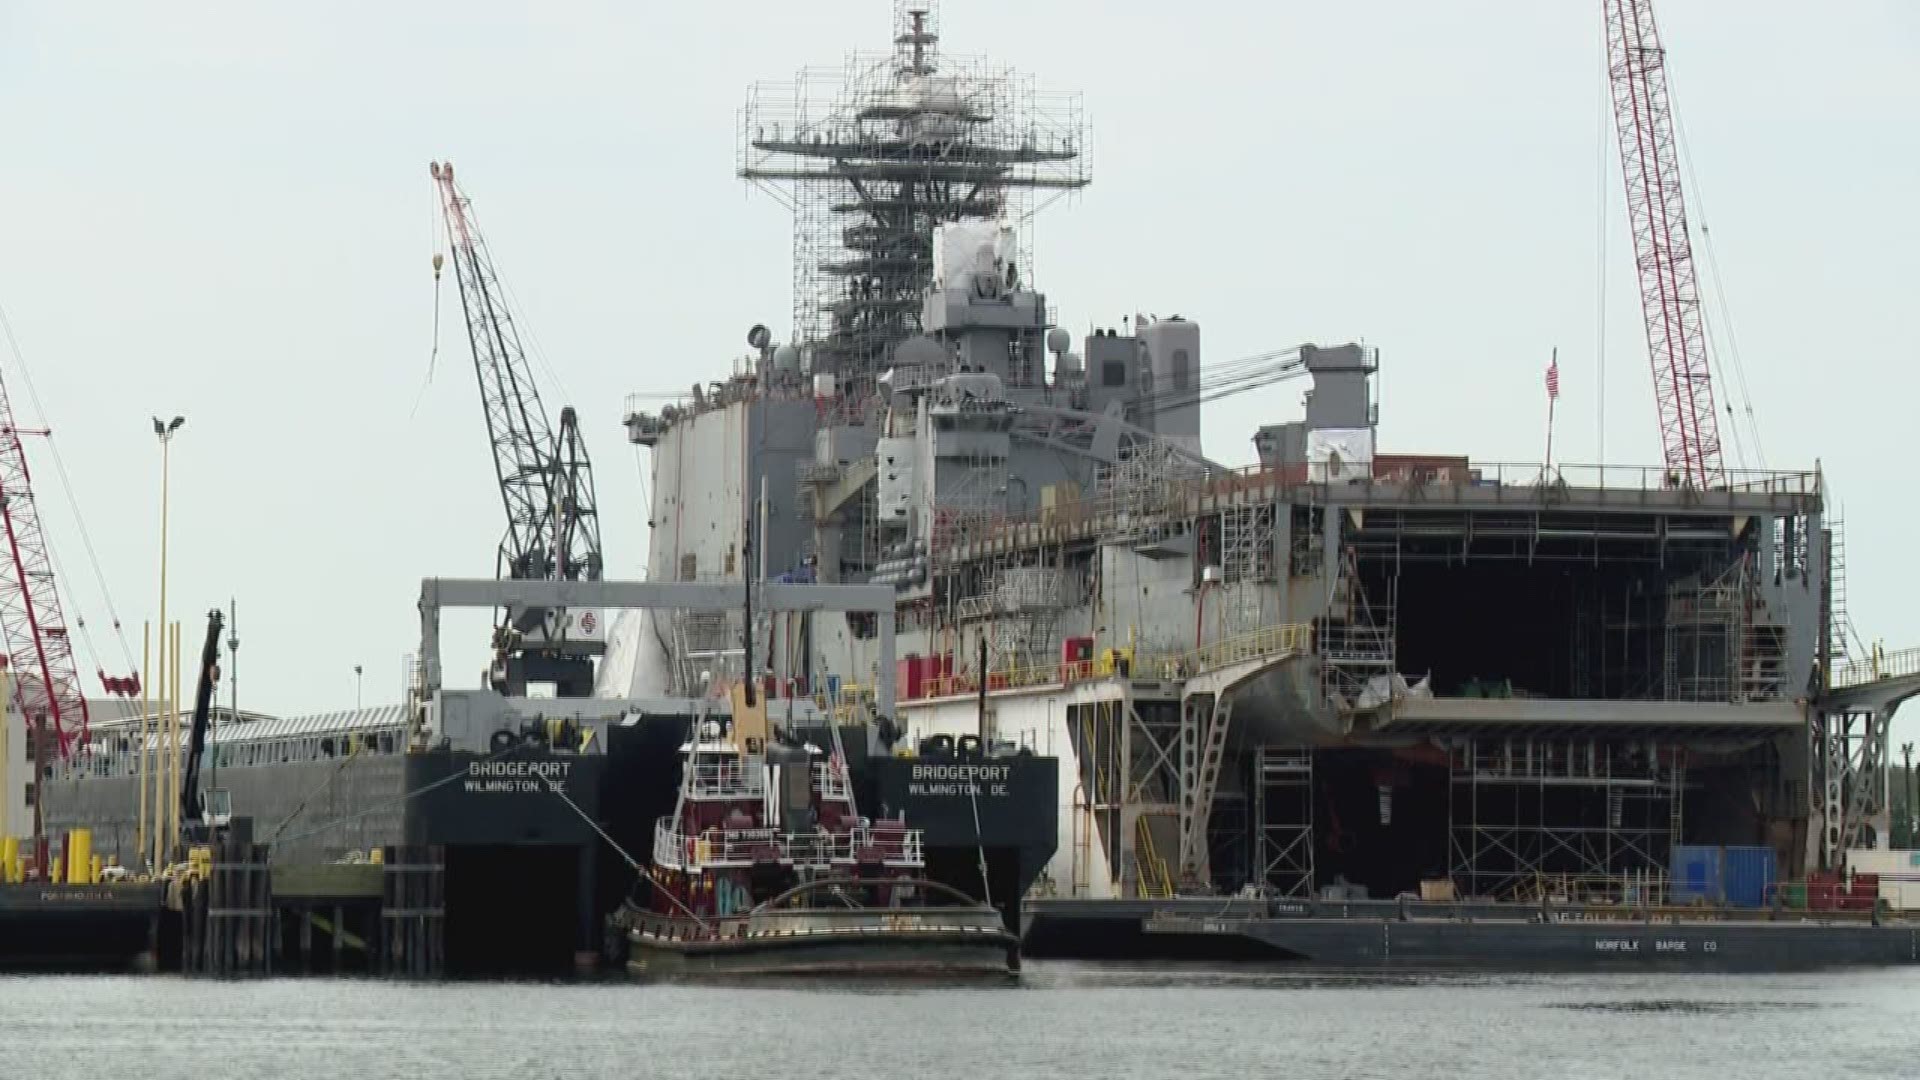 A phone threat was made in reference to USS Gunston Hall on Tuesday morning, which is being worked on at the shipyard.